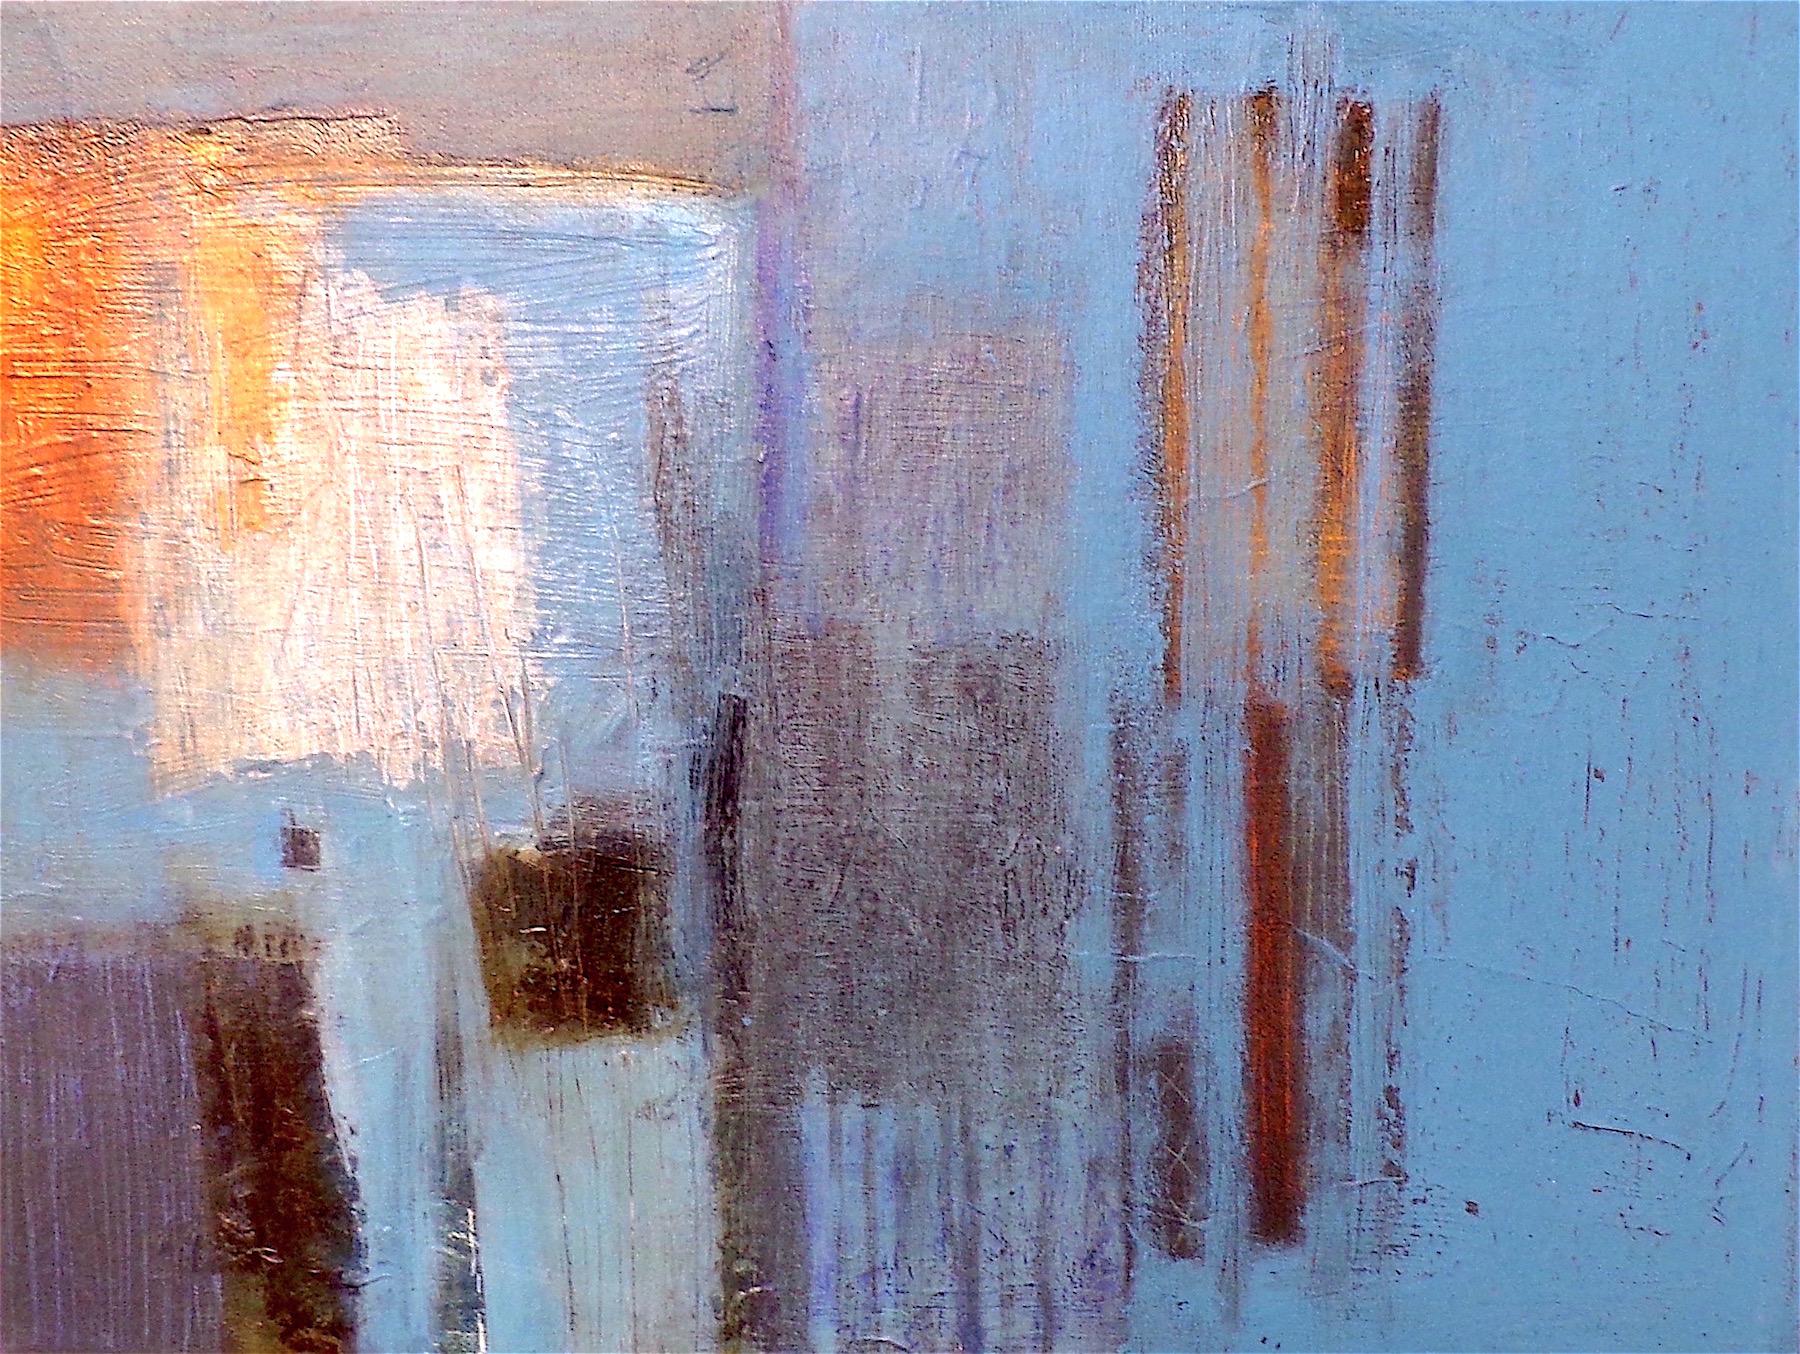 Fragment. Contemporary Abstract Mixed Media on Canvas Painting